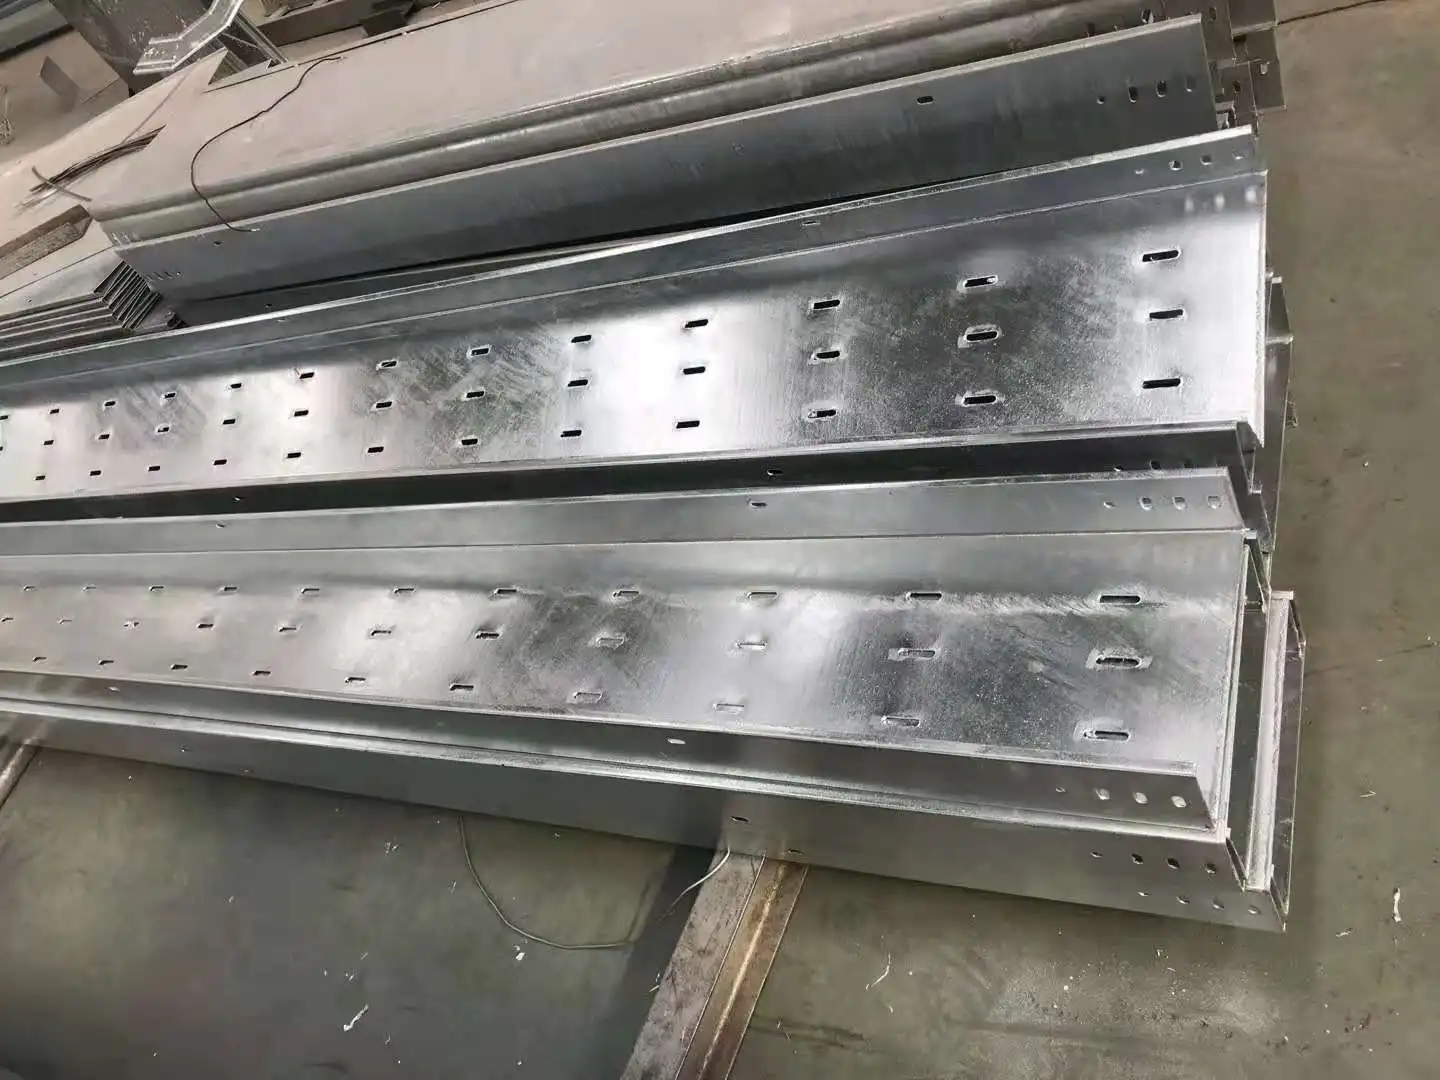 Waterproof aluminum ventilated cable tray support raceway powder